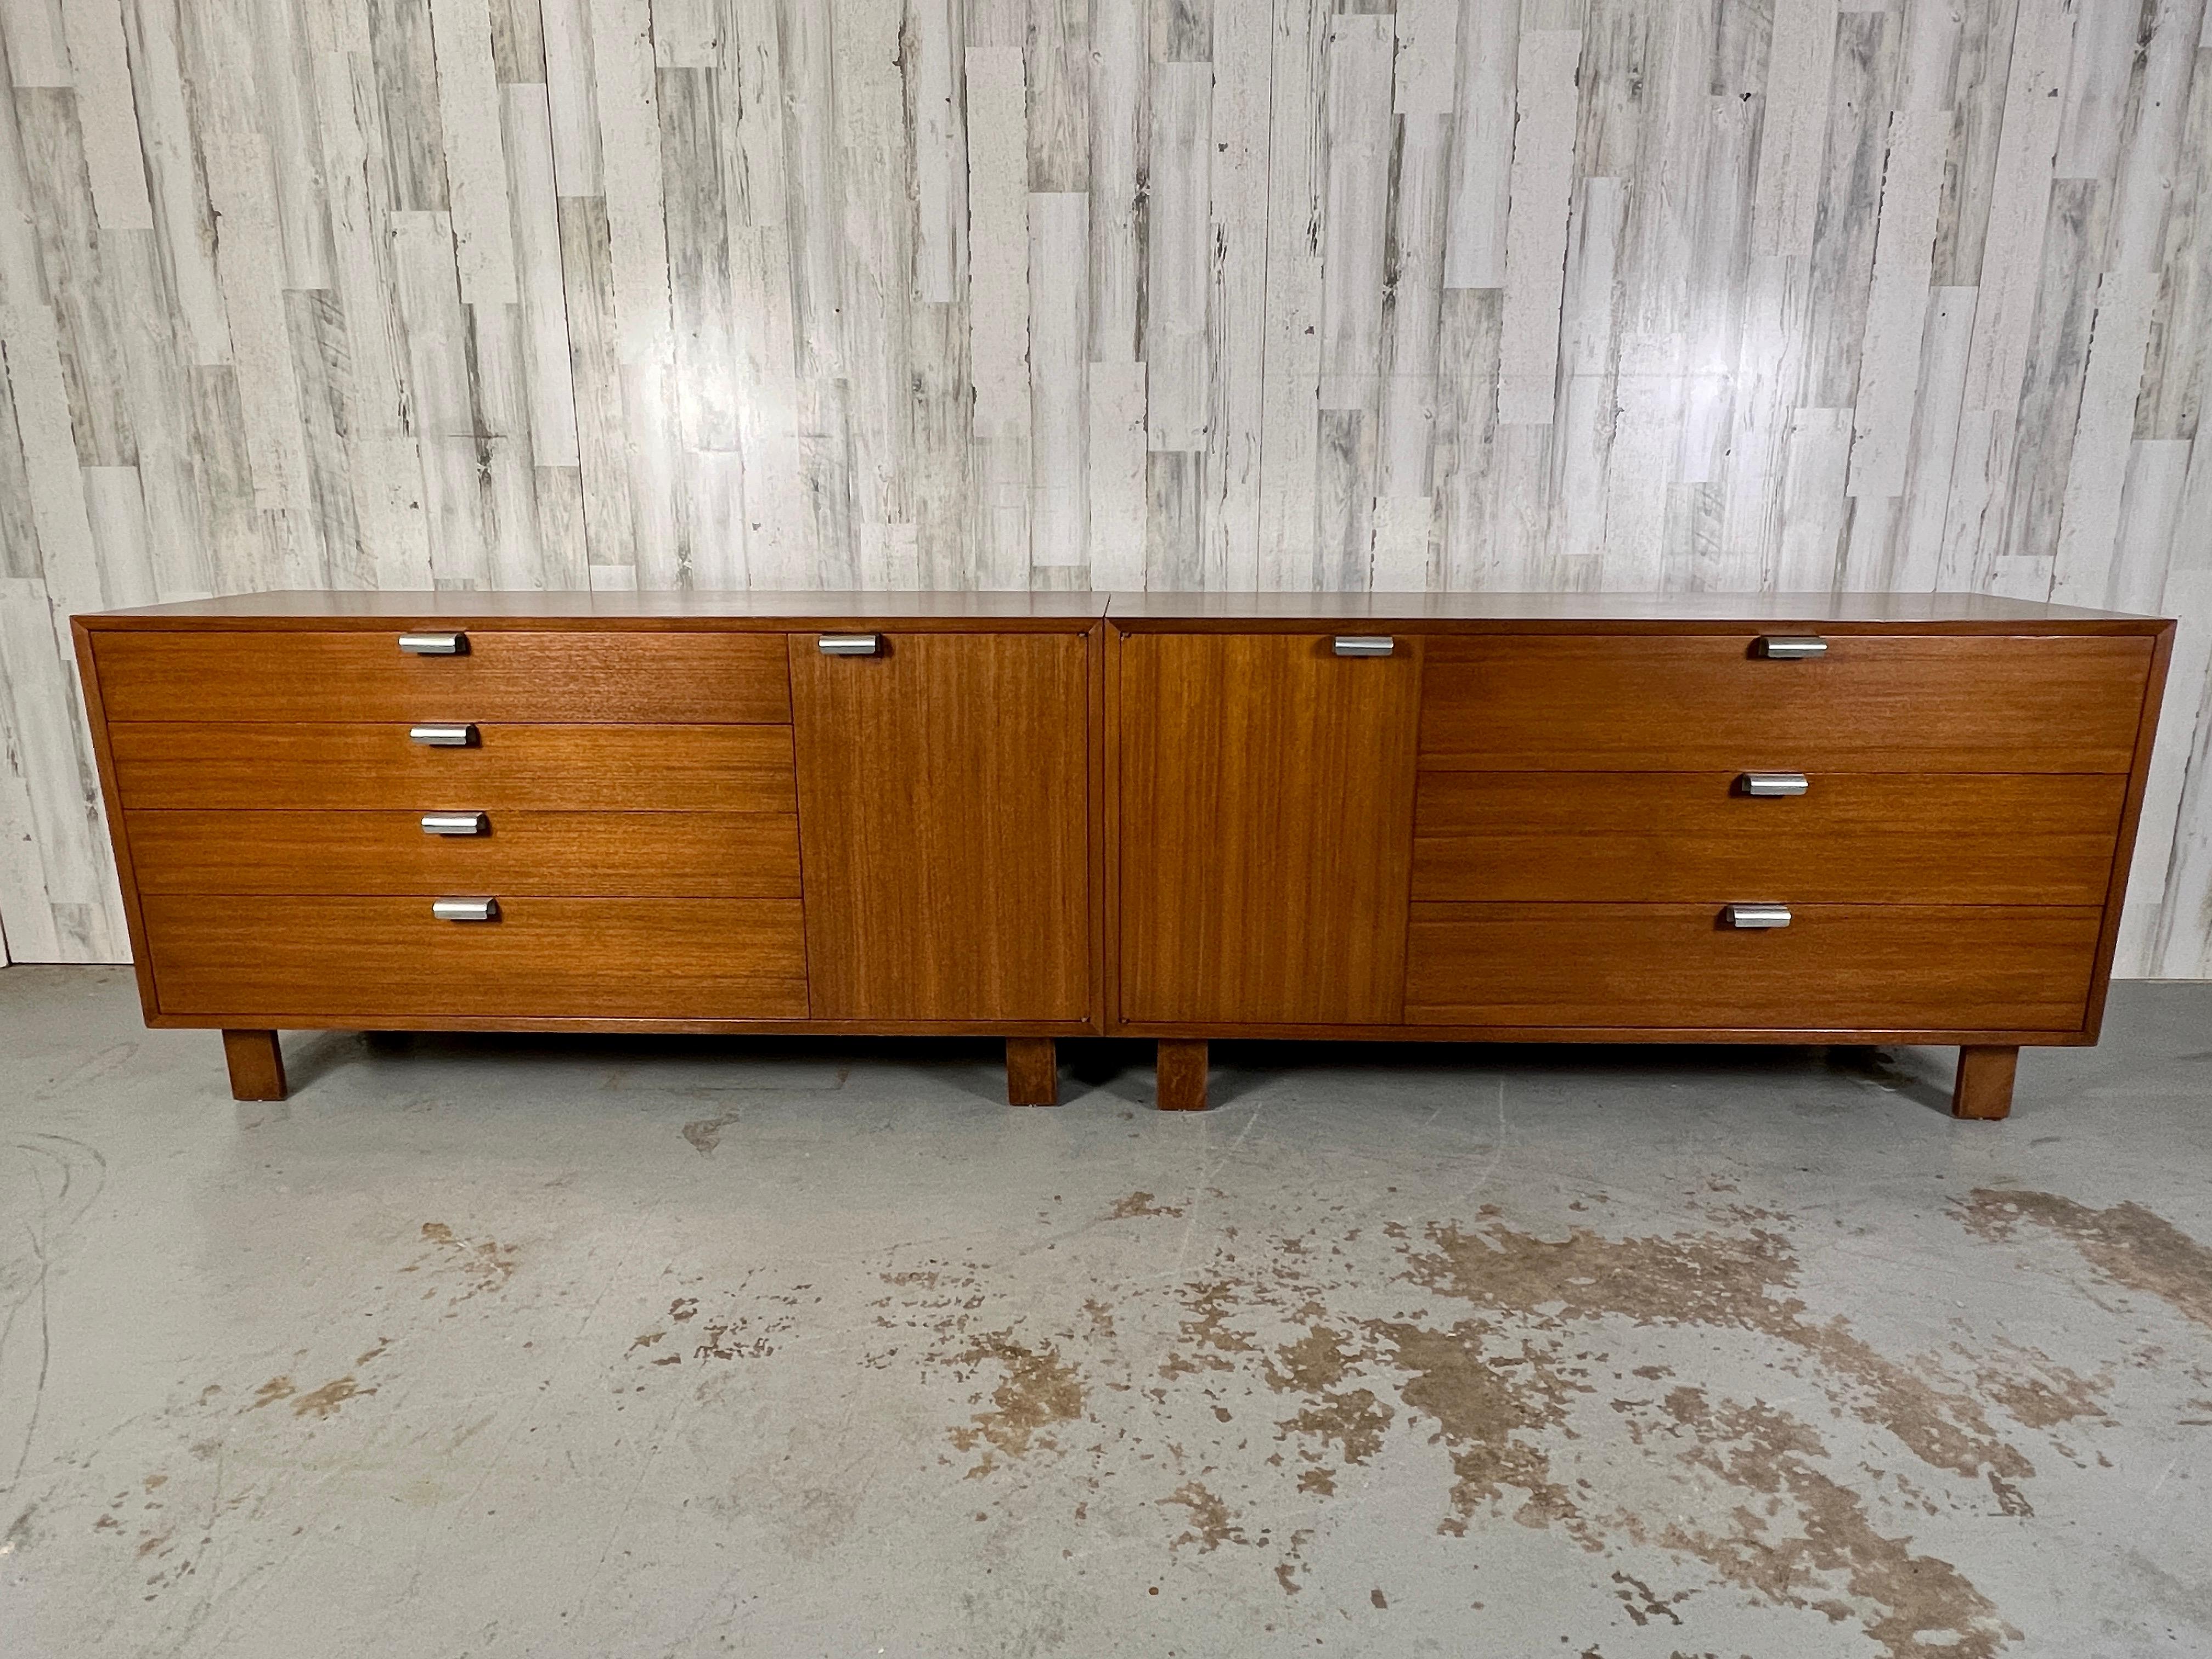 Two Mid-Century Modern credenza or dressers, designed by George Nelson for Herman Miller, American, circa 1950s.
Both cabinets are the same dimensions the one on the left has three drawers and the right on has four drawers. The cabinet door is the